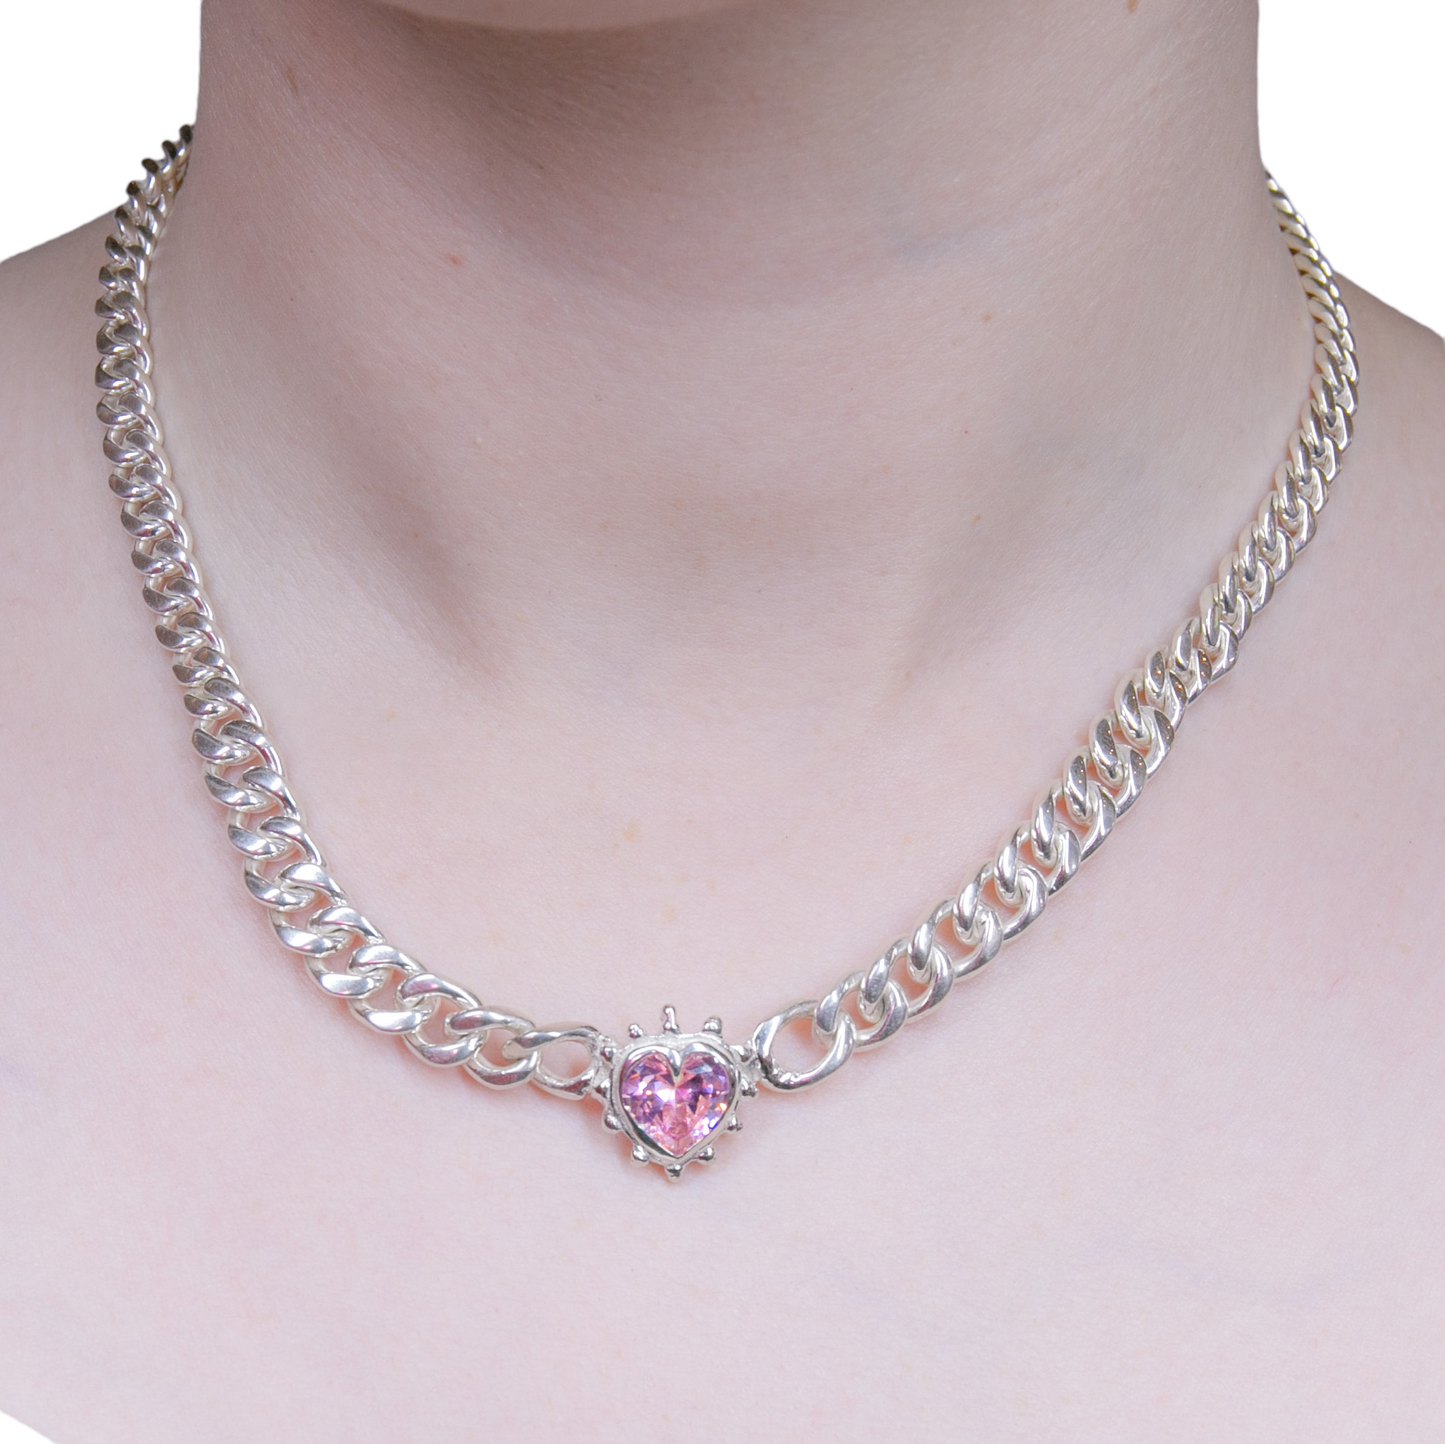 Limited Edition Pink Chained Heart Necklace